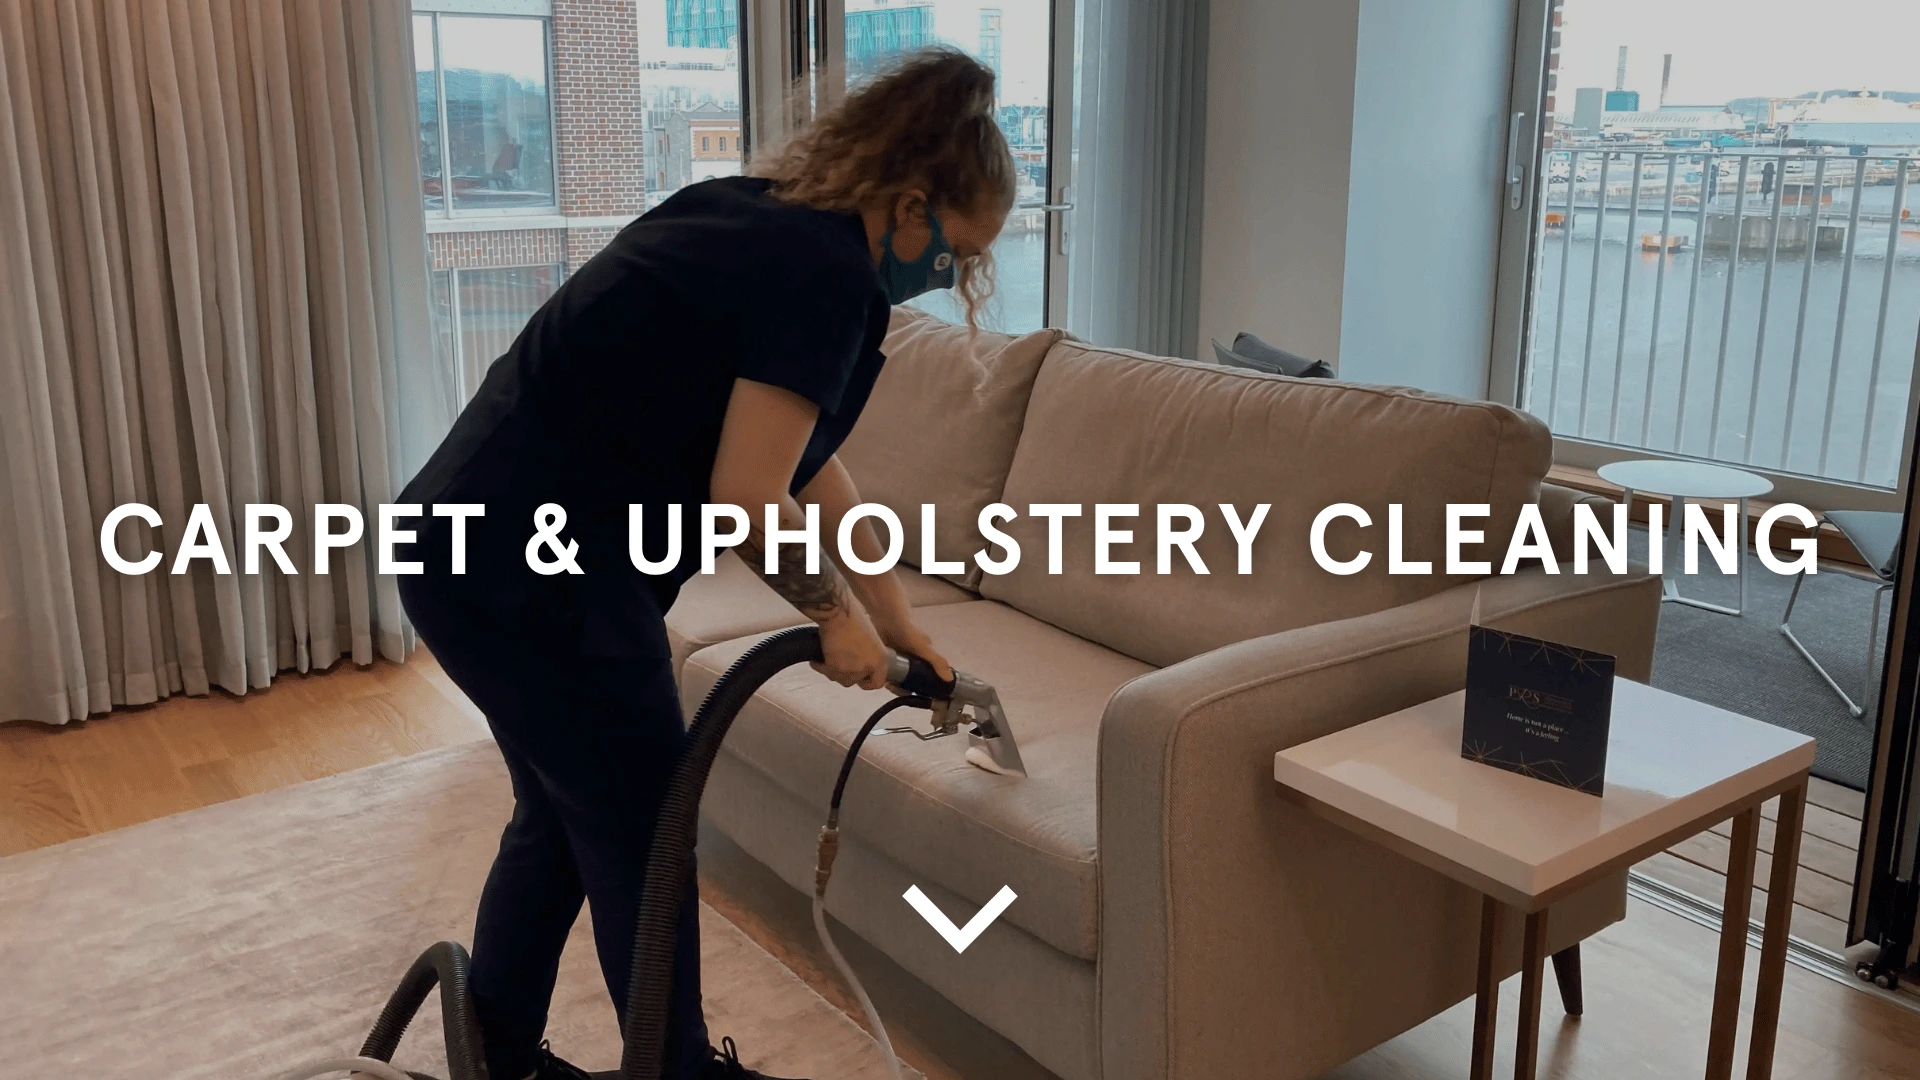 Upholstery & Carpet Cleaning Service